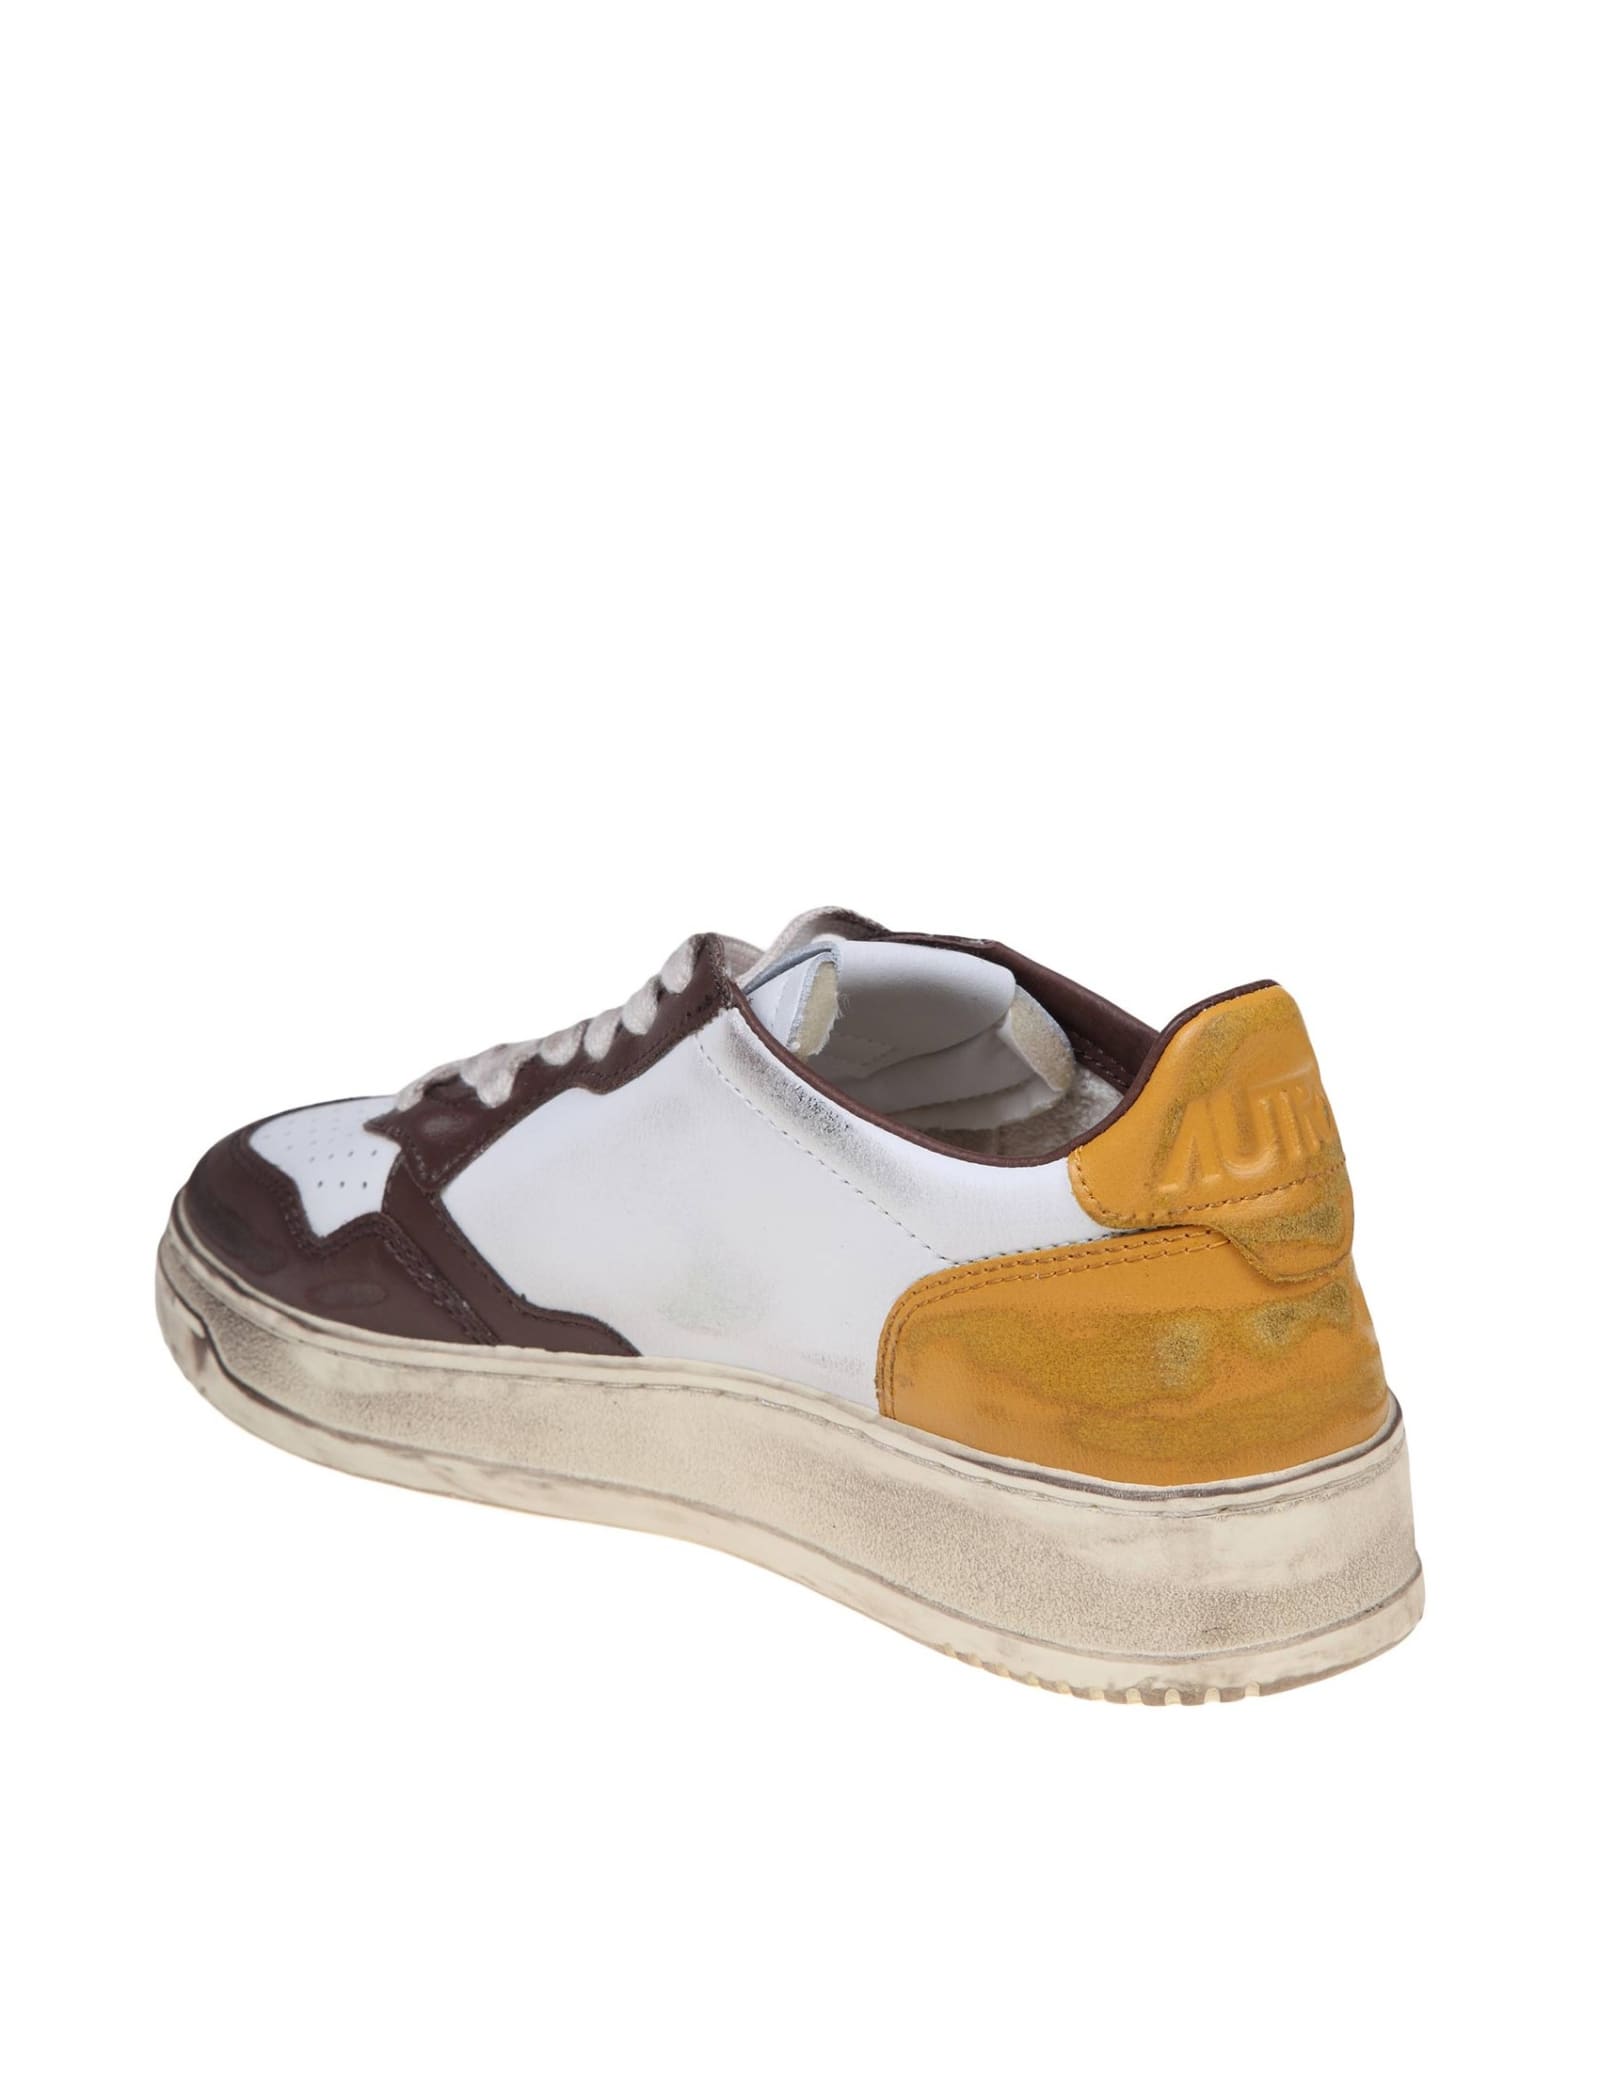 Shop Autry Sneakers In Super Vintage Leather In Bianco Marrone Giallo